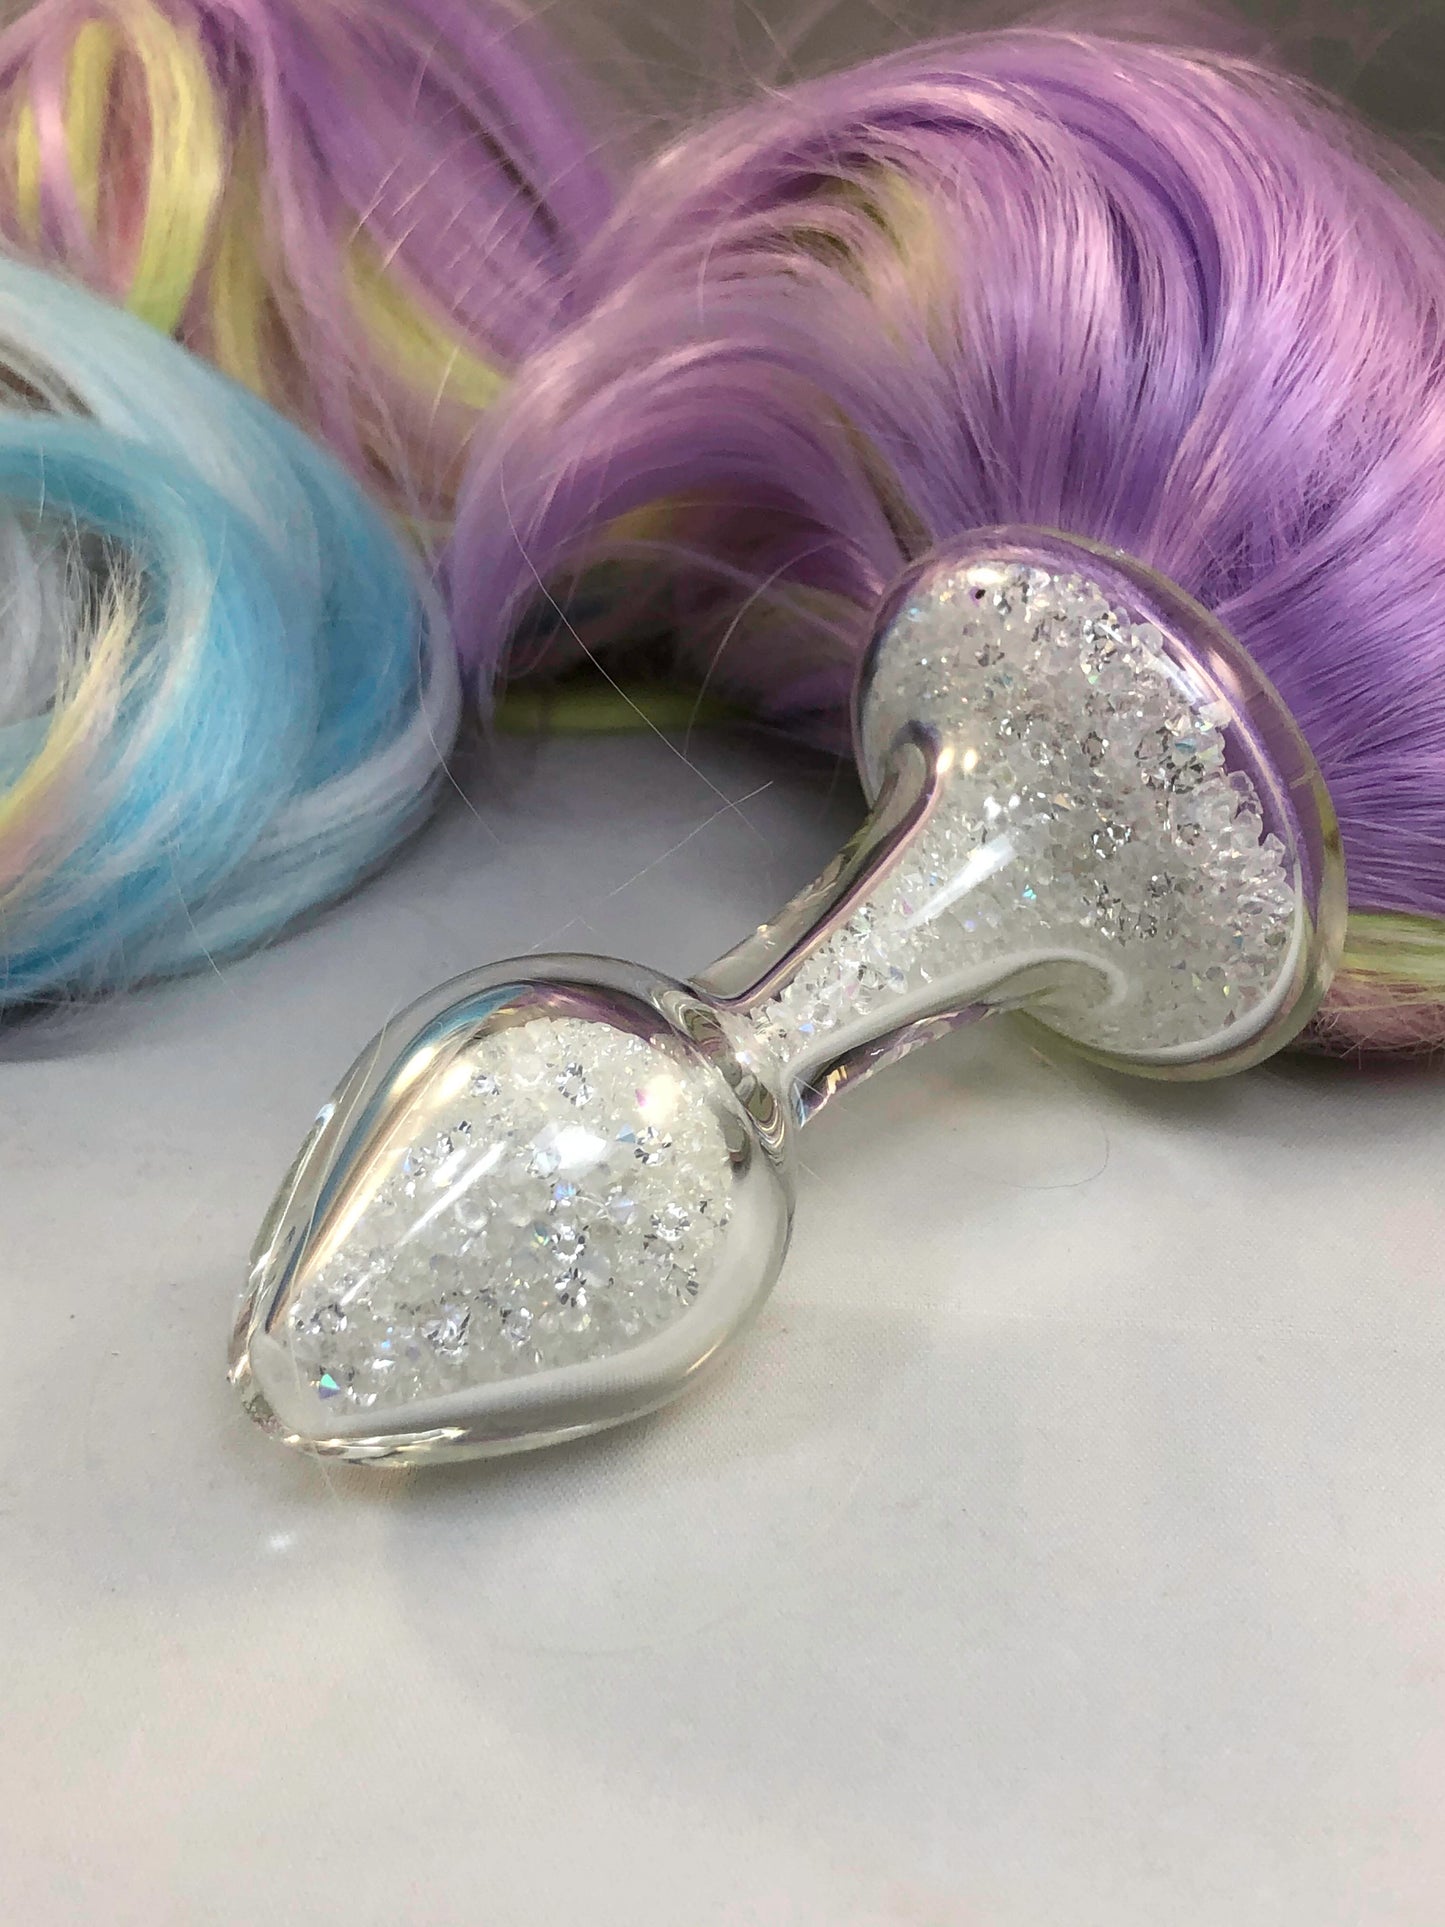 Faux pastel pony tail, close up of plug.